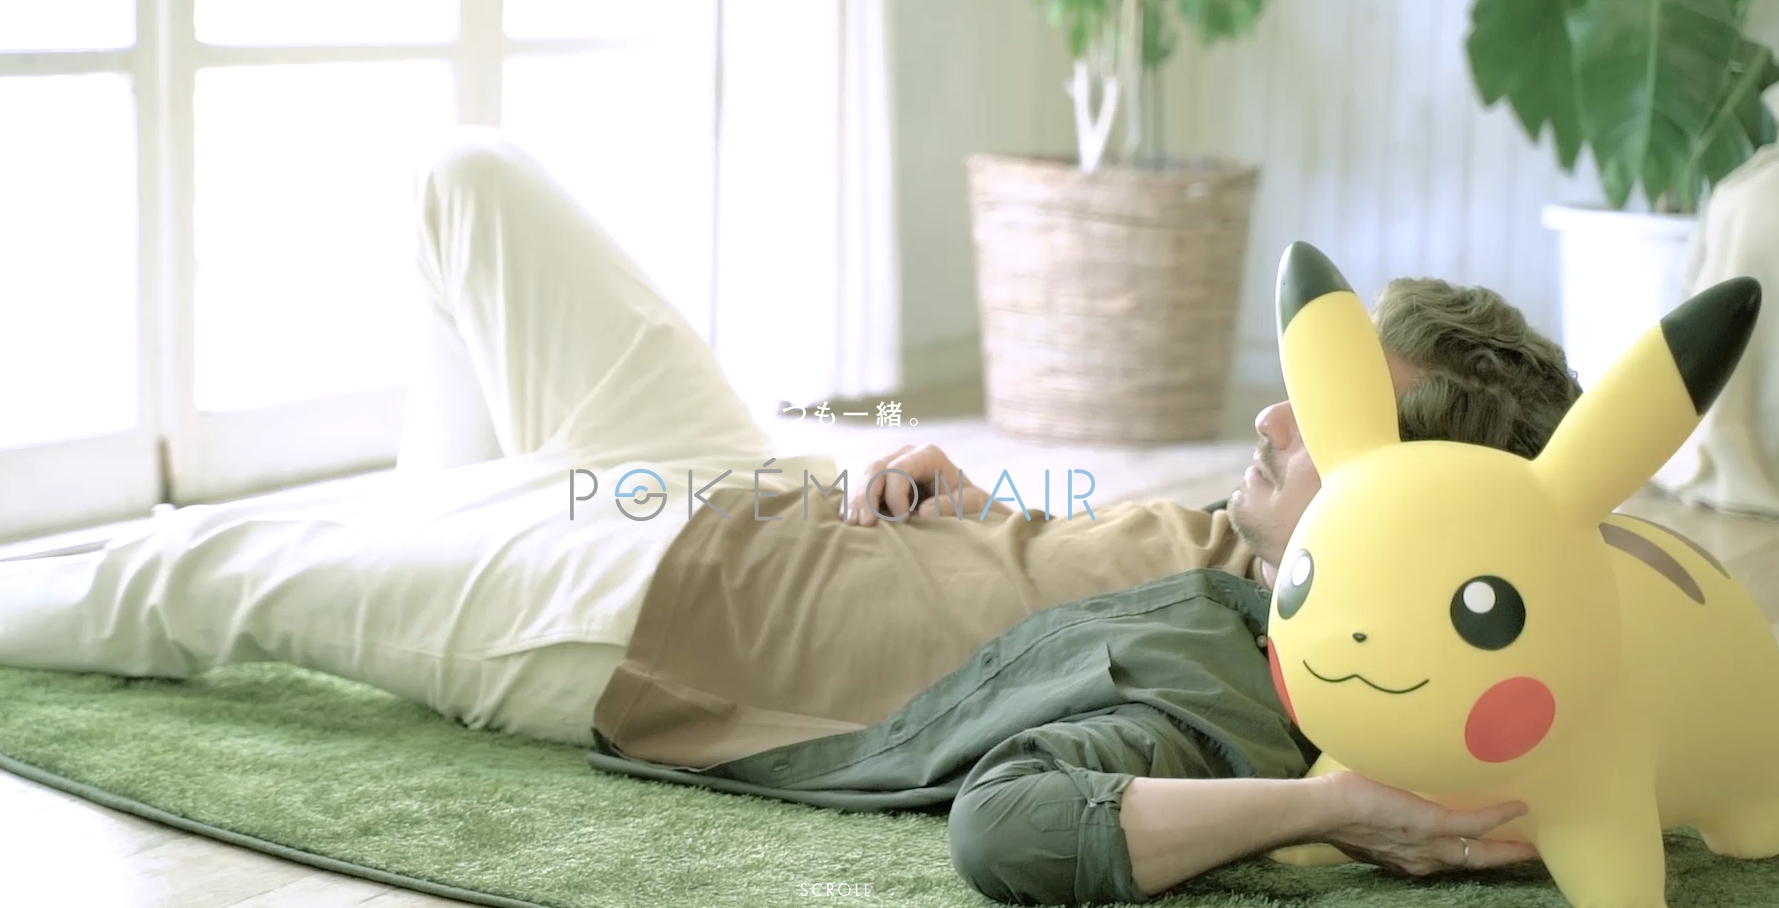 Jam Store Announces Pikachu Pokémon Air Toy To Use As A Chair Or Decorative Item